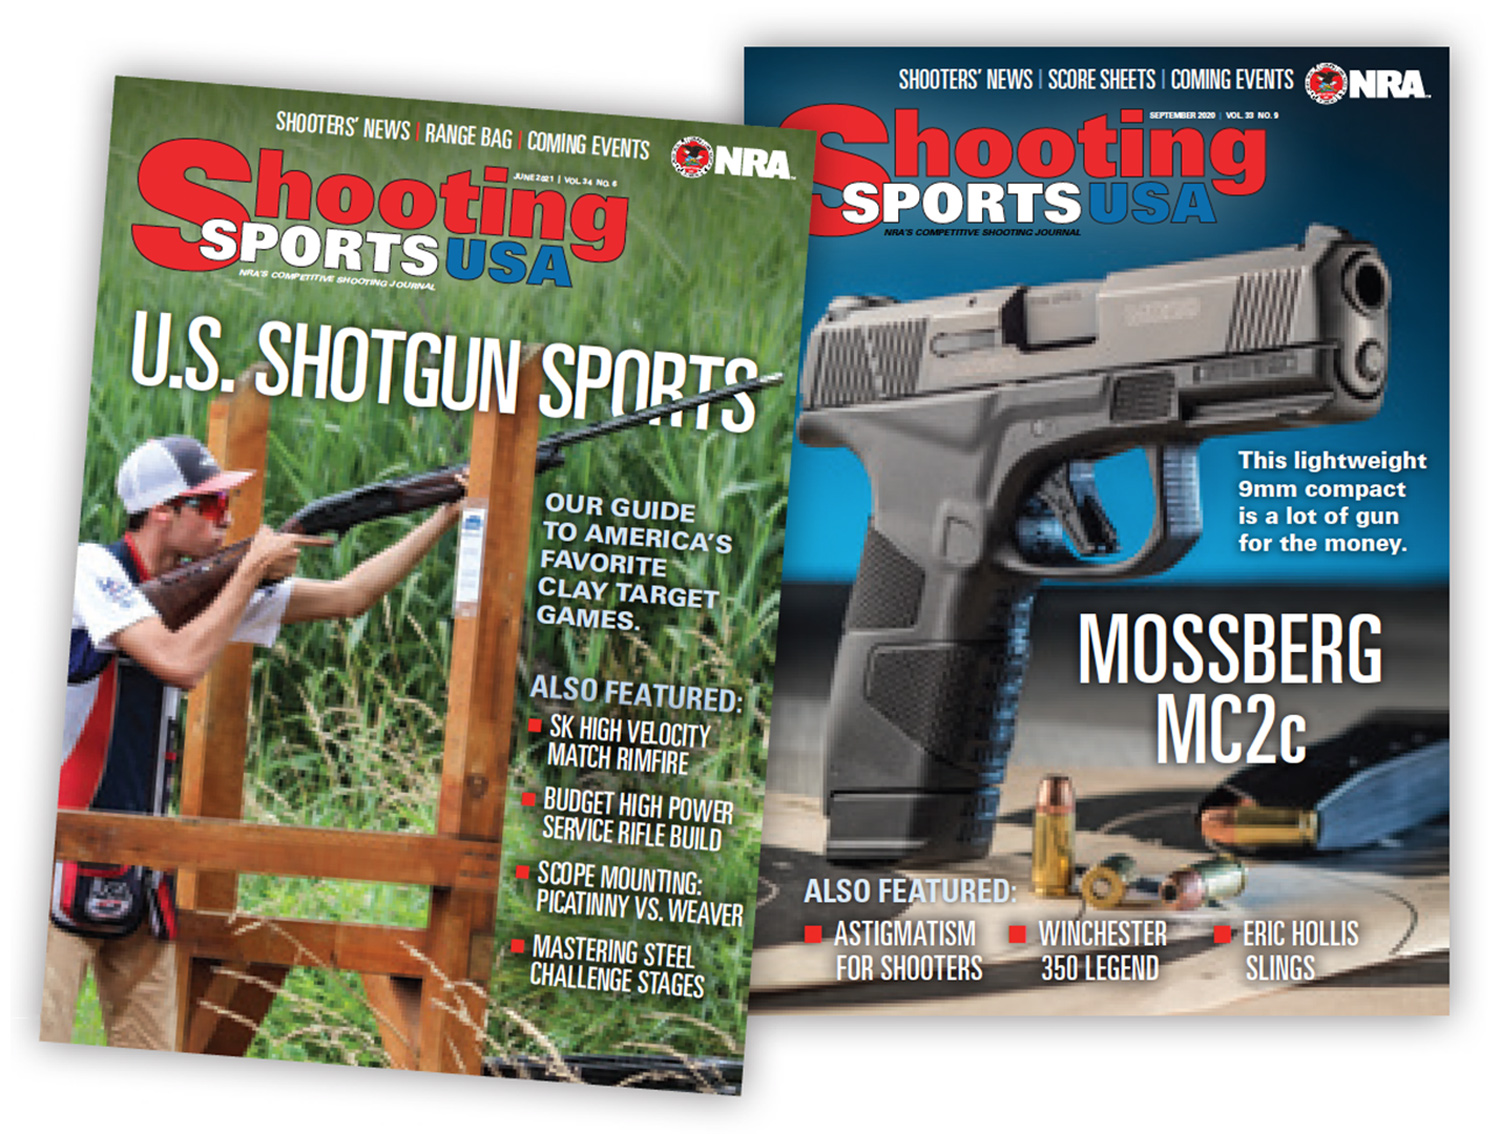 SSUSA covers